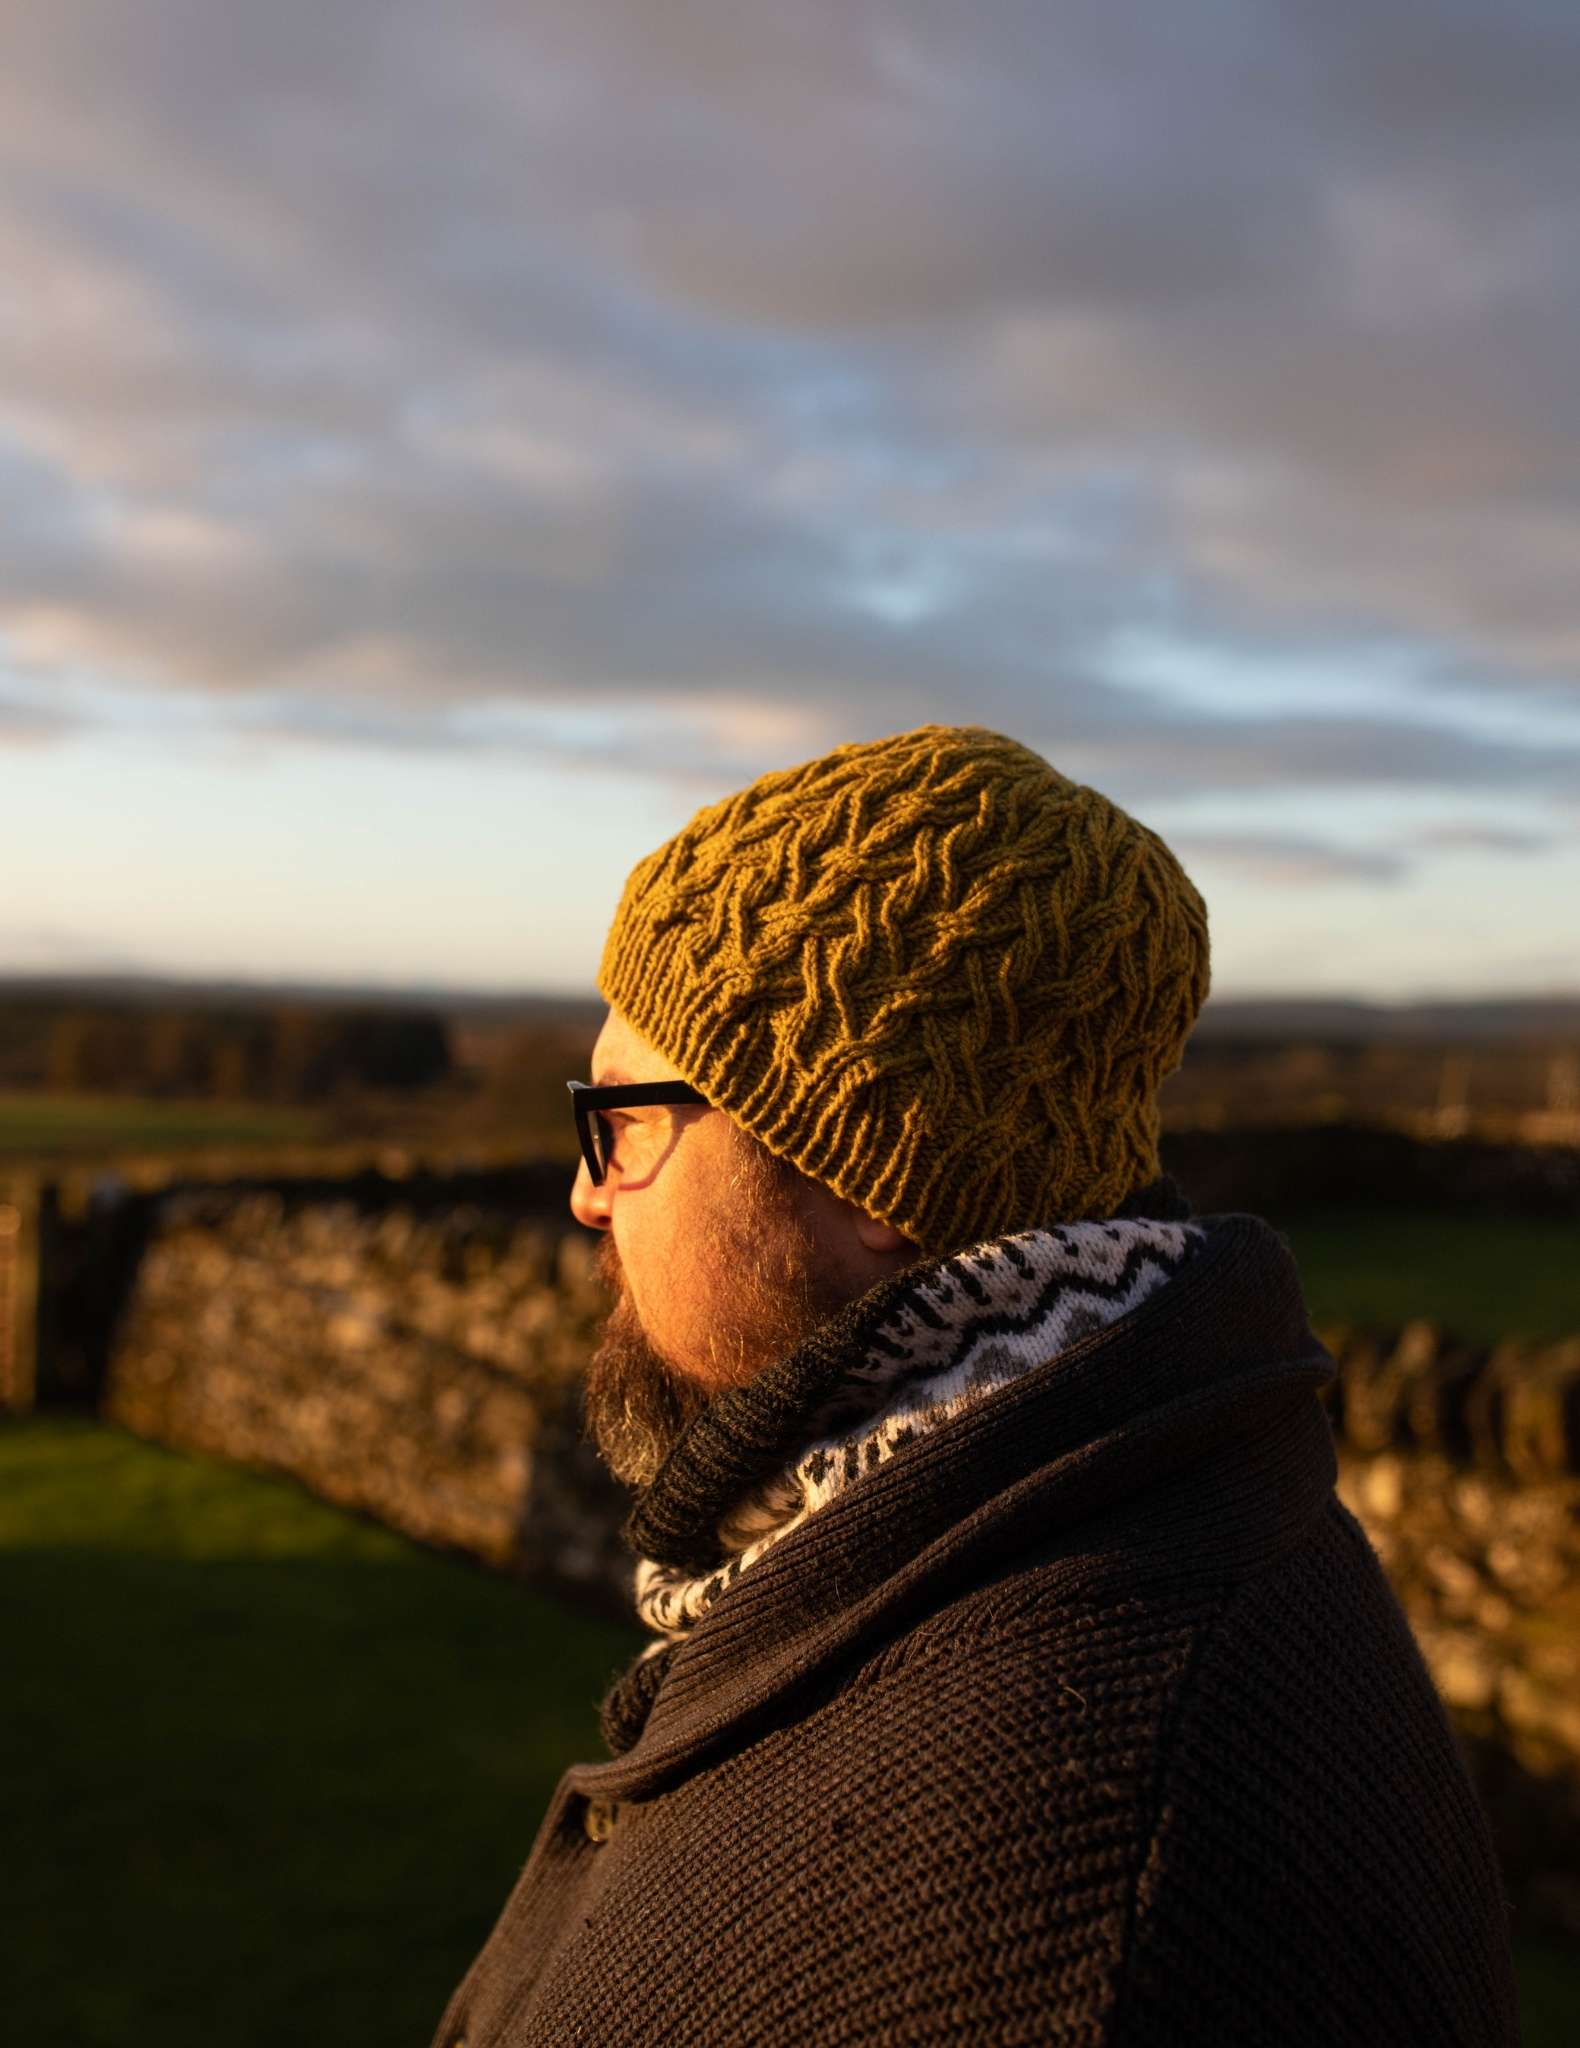 A white man with a beard and glasses looks out onto a rural landscape at sunset. He is wearing a green cabled hat and colourwork cowl